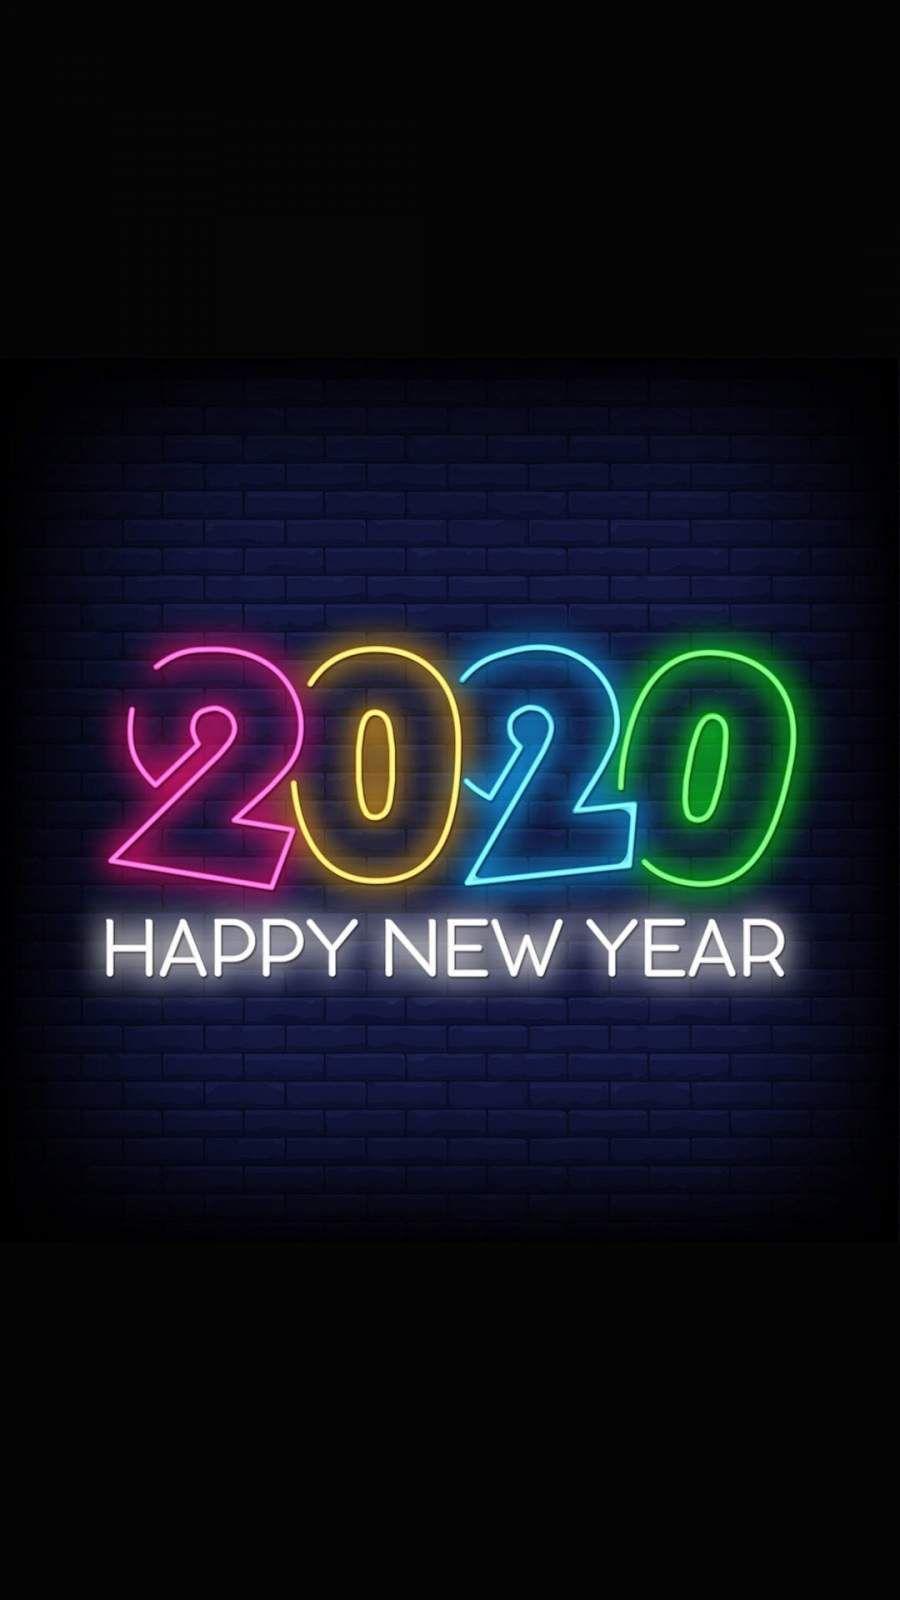 Happy New Year 2020 iPhone Wallpaper 1